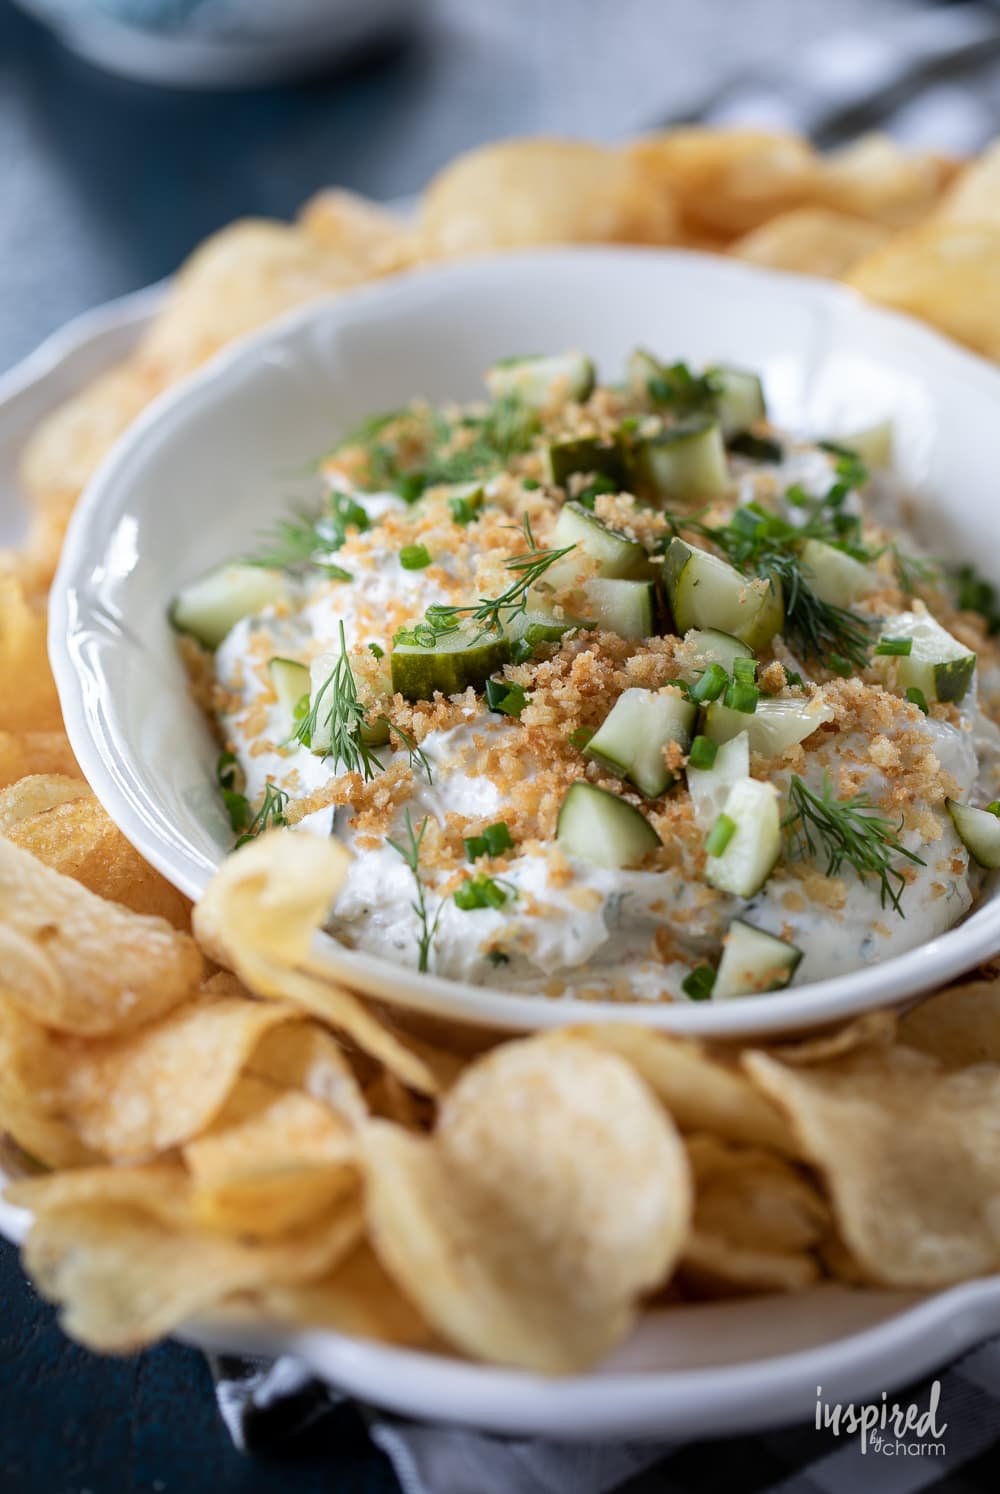 fried pickle and ranch dip in a bowl with potato chips.